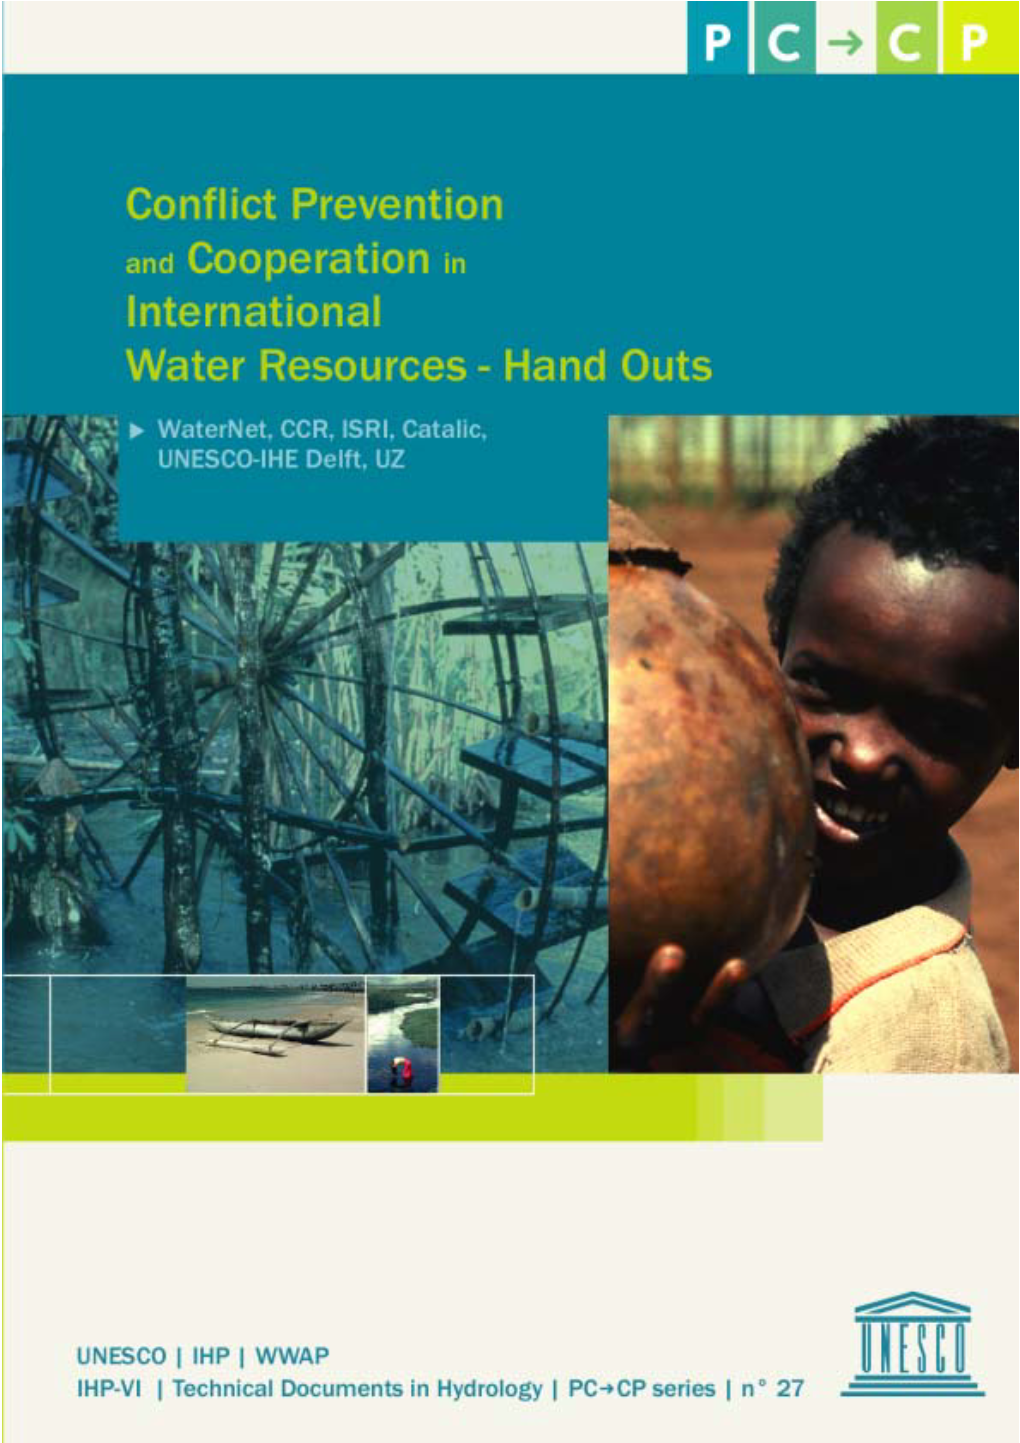 Conflict Prevention and Cooperation in International Water Resources”